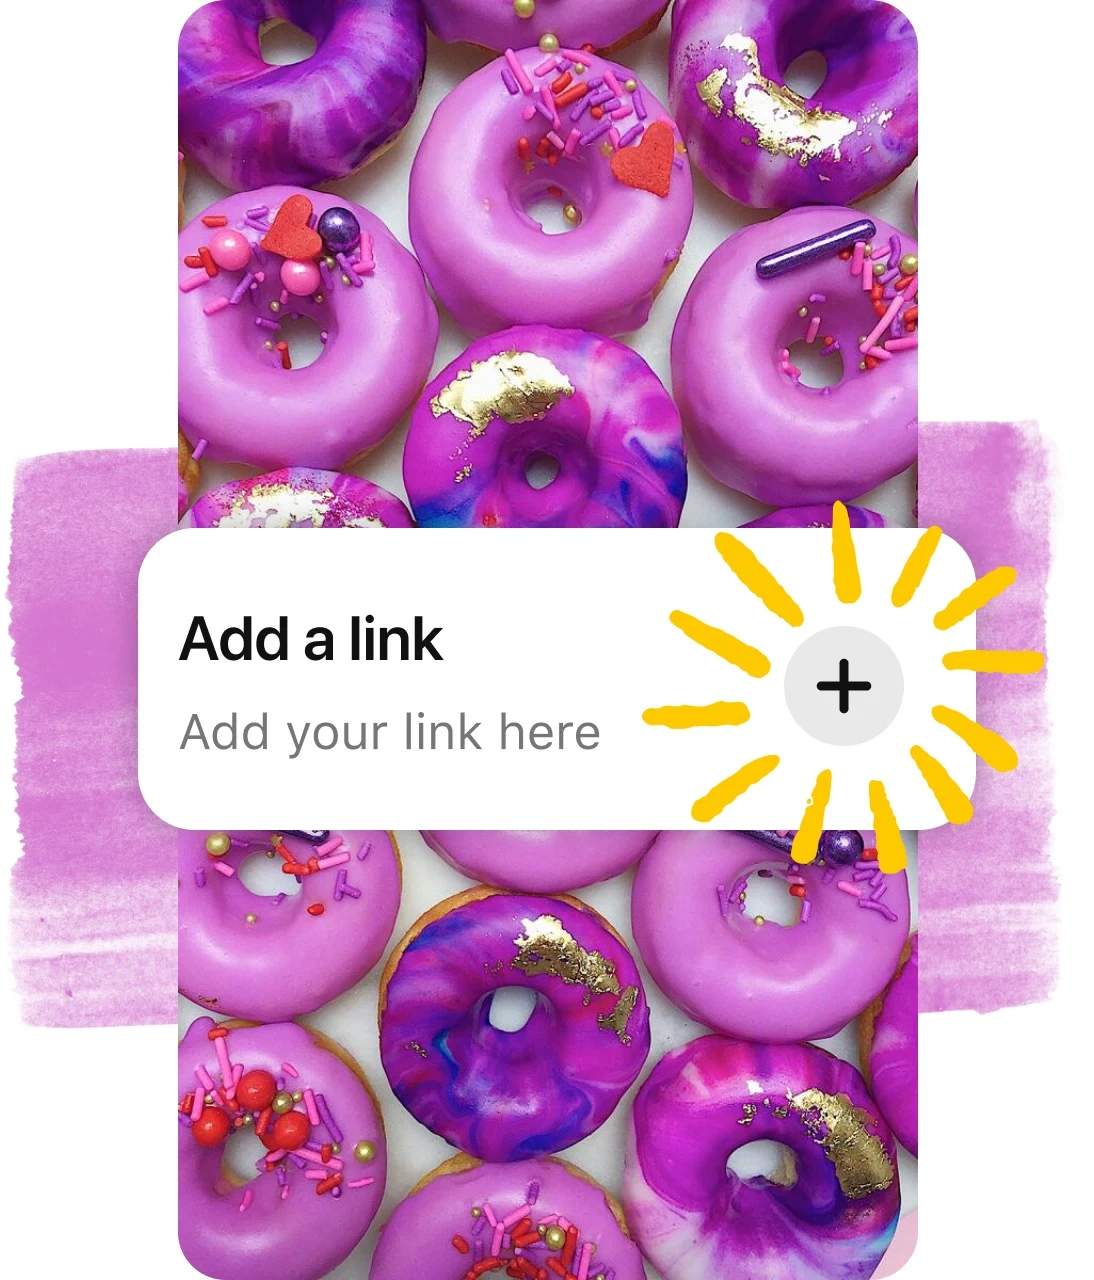 Add a link button overlaid on pin of purple donuts